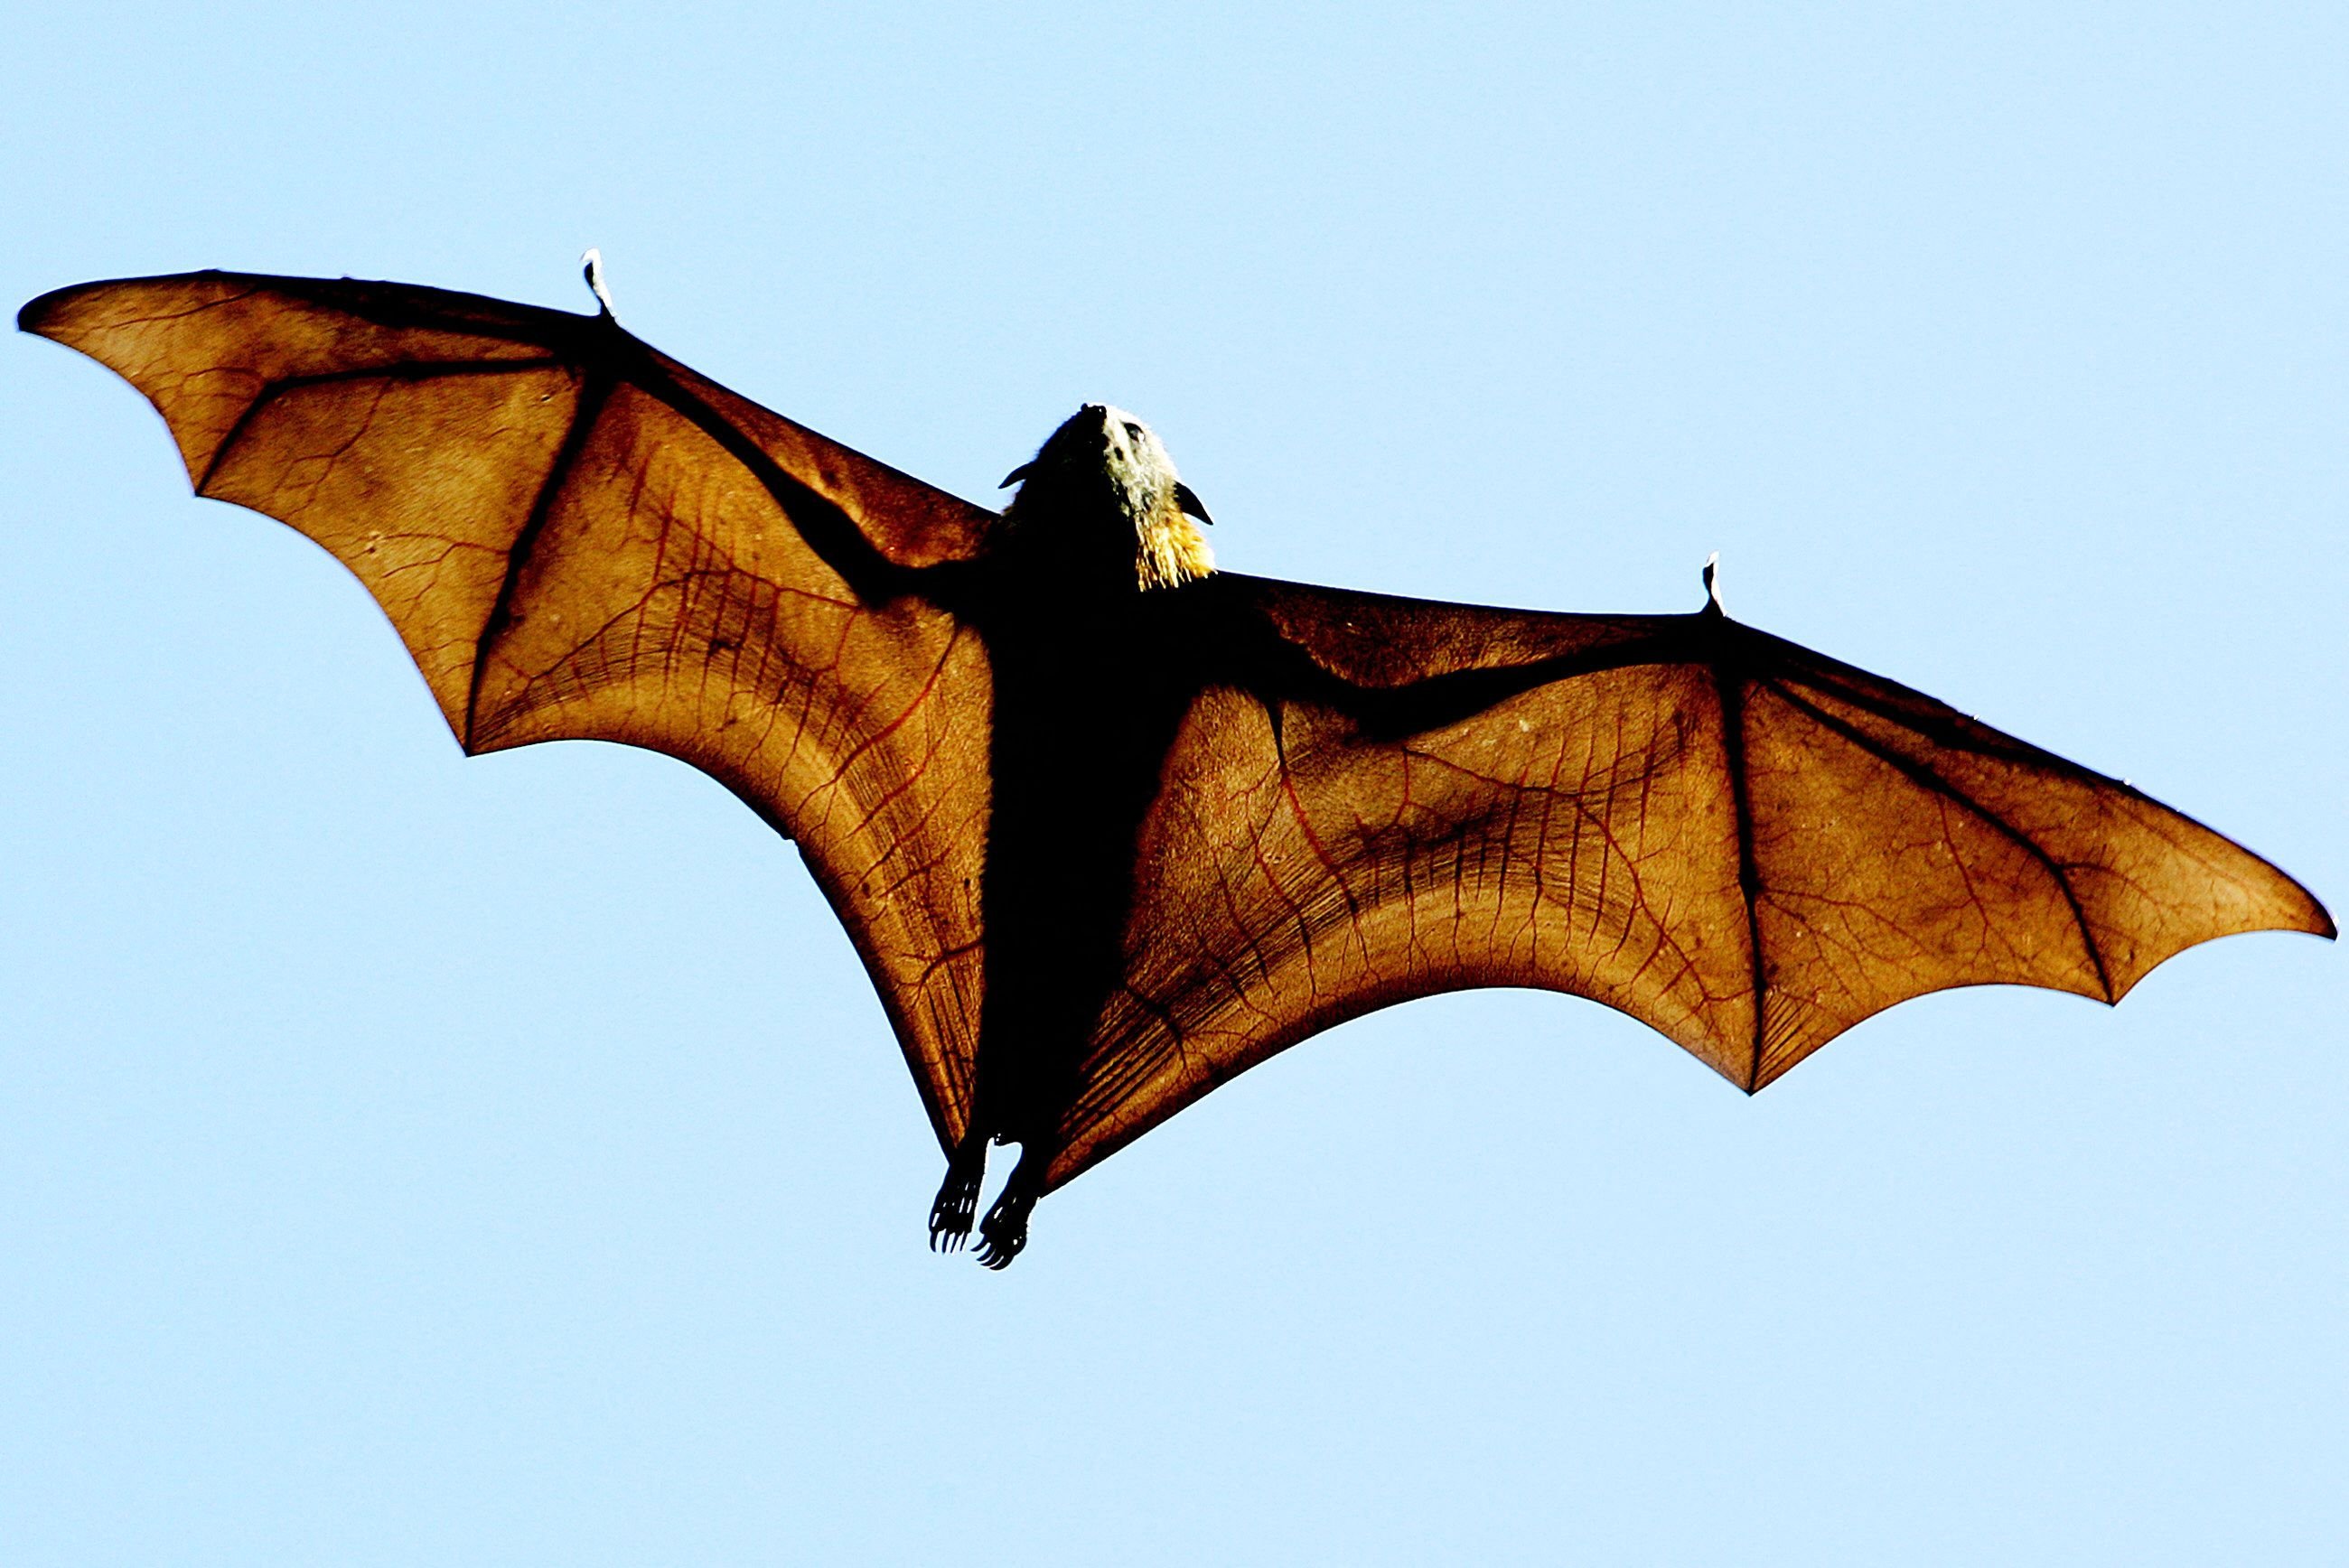  This file photo taken on August 17, 2005 shows a grey-headed Flying-fox (Pteropus poliocephalus), a native Australian bat, stretching its leathery wings as it flies high over Sydney